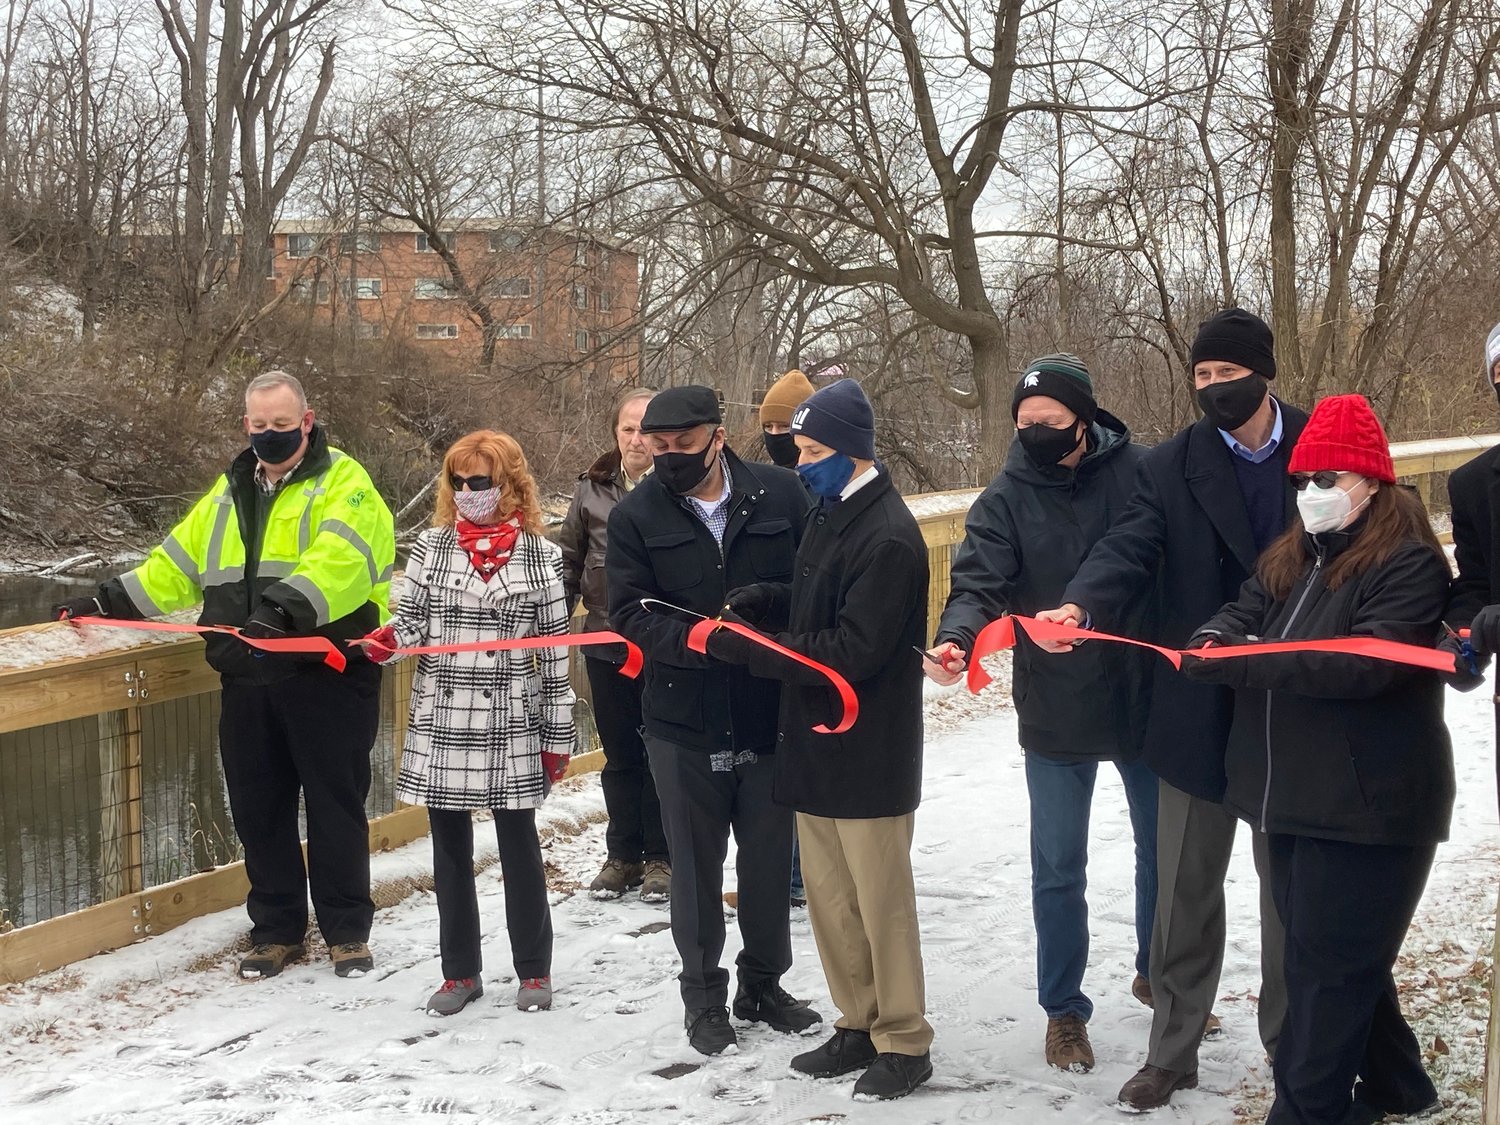 Lansing Mayor Andy Schor cuts a ribbon on the Lansing River Trail on Thursday to commemorate repairs made in 2020. He was joined by several local parks officials, including Ingham County Board of Commissioners Chairman Bryan Crenshaw.